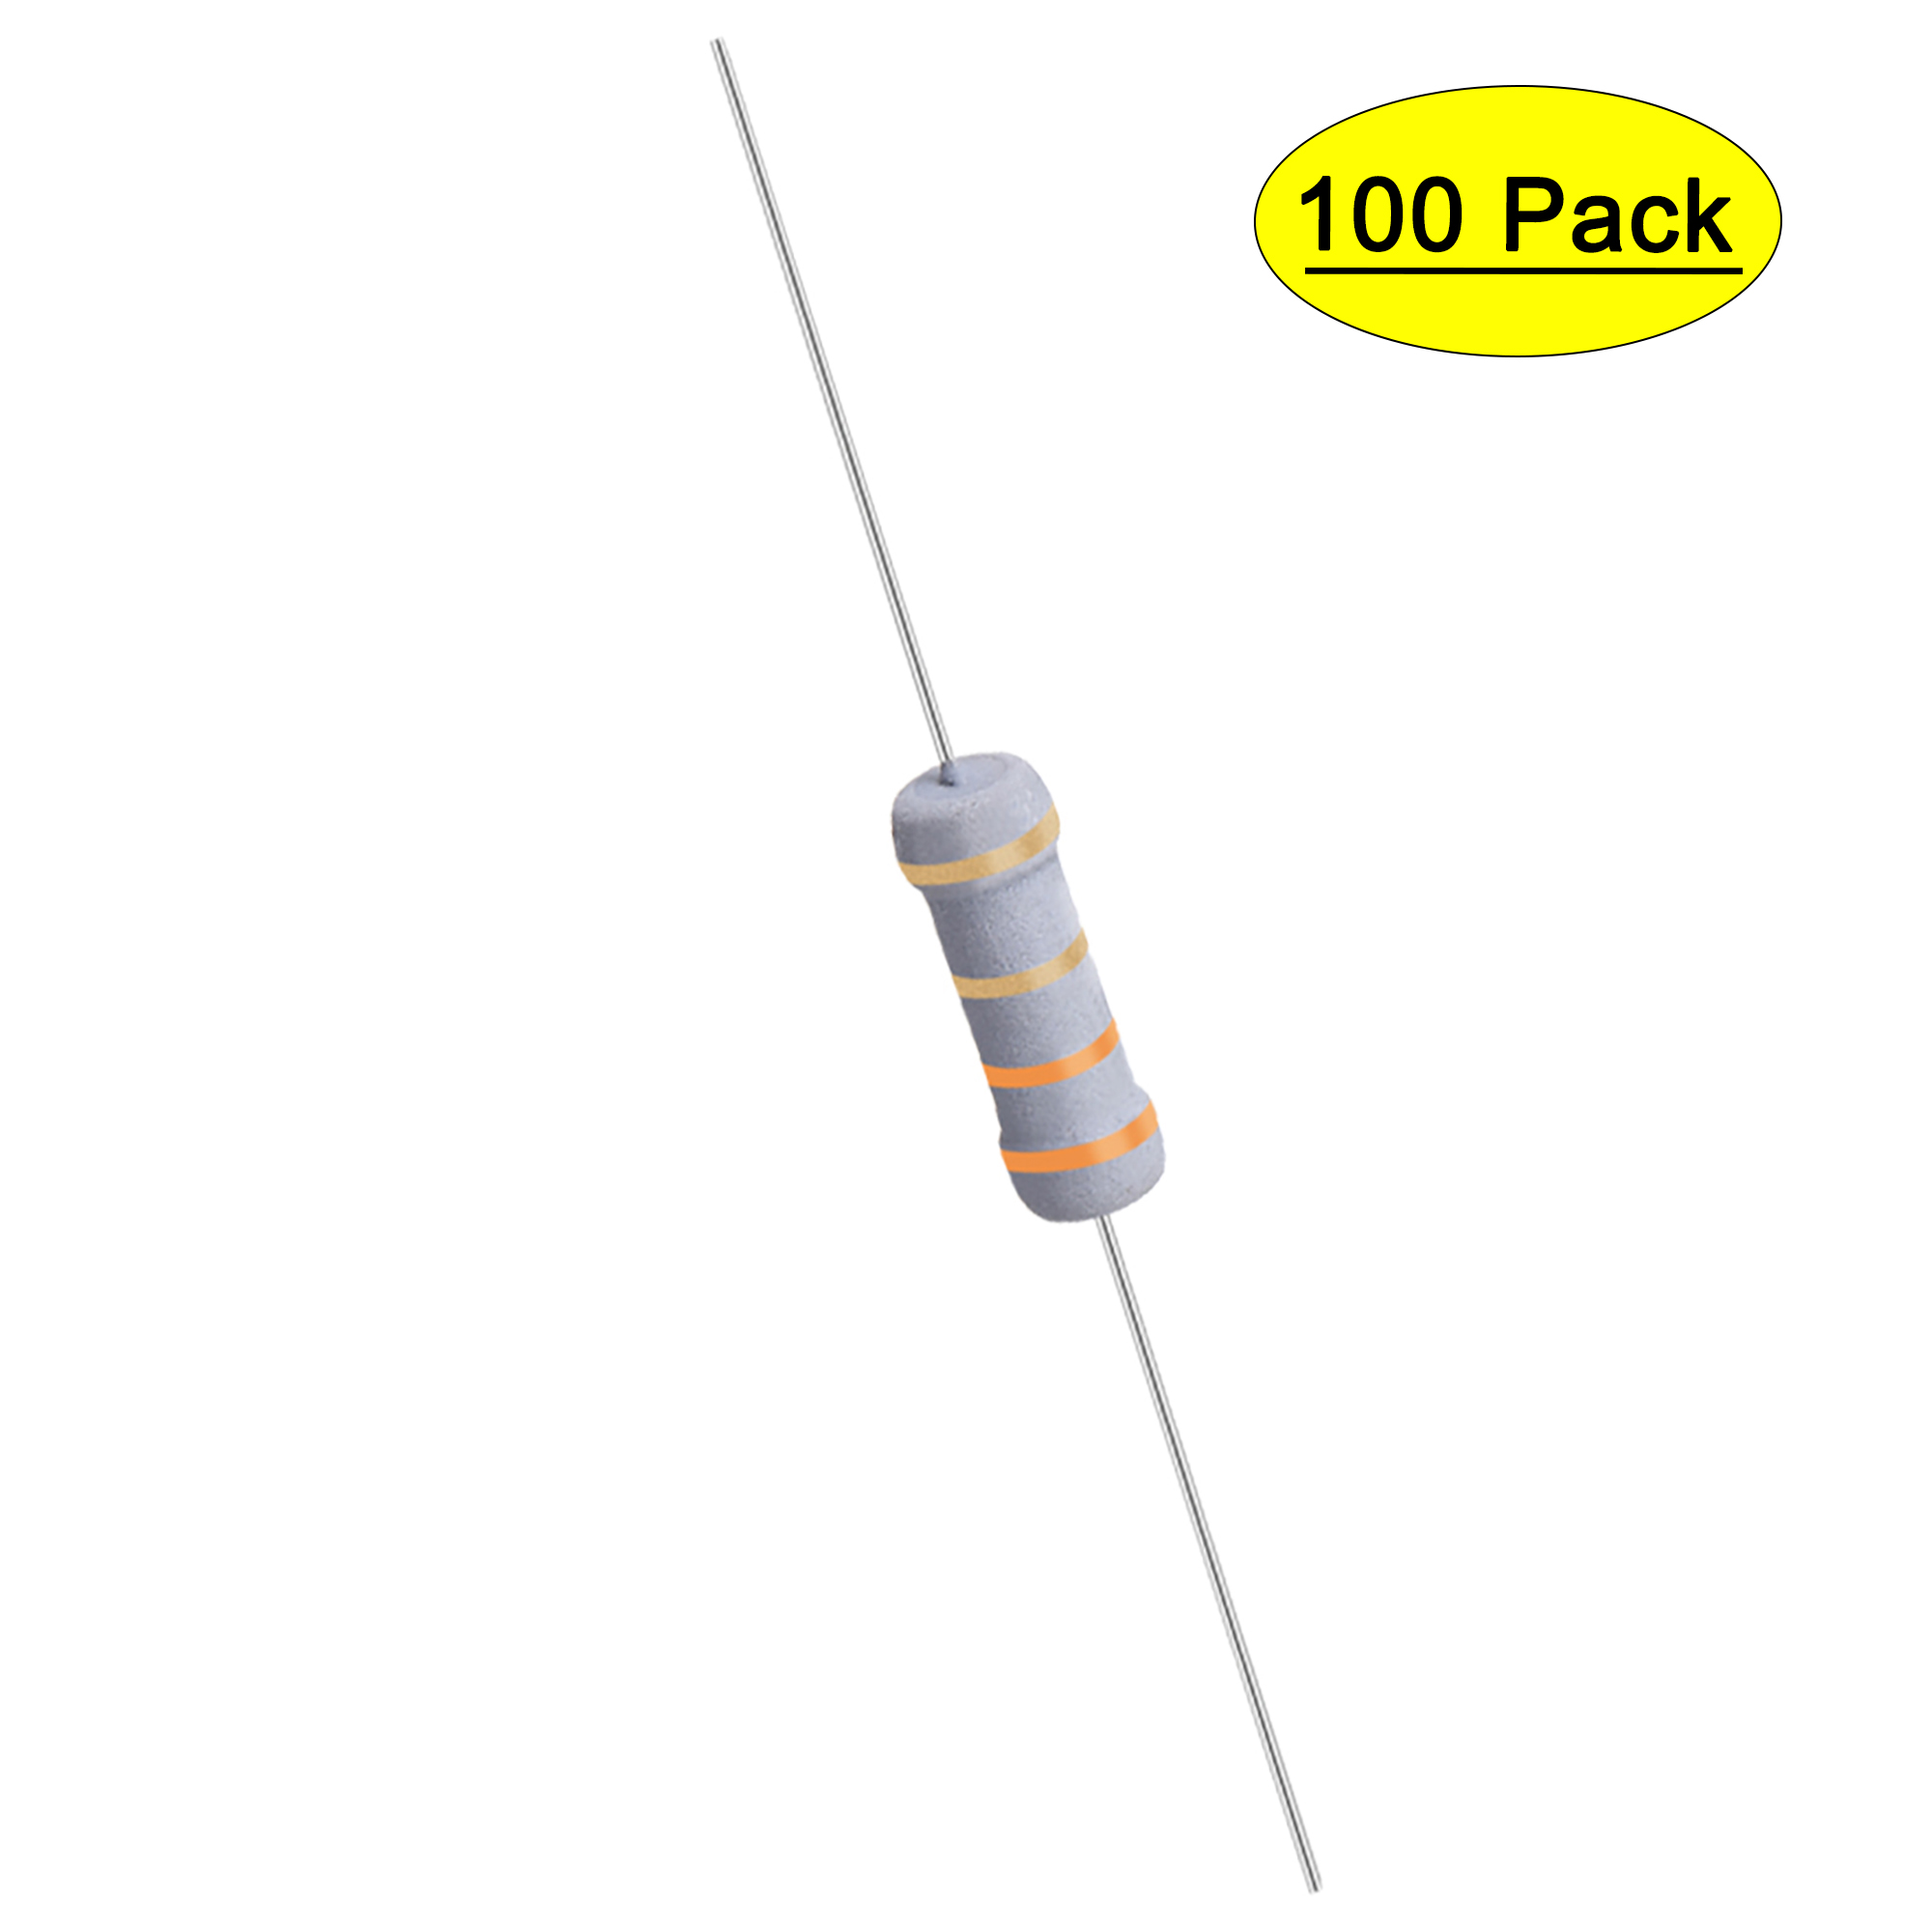 Uxcell 3.3 Ohm 1W ±5% Tolerance Axile Lead Metal Oxide Film Resistor 100 Count - image 1 of 5